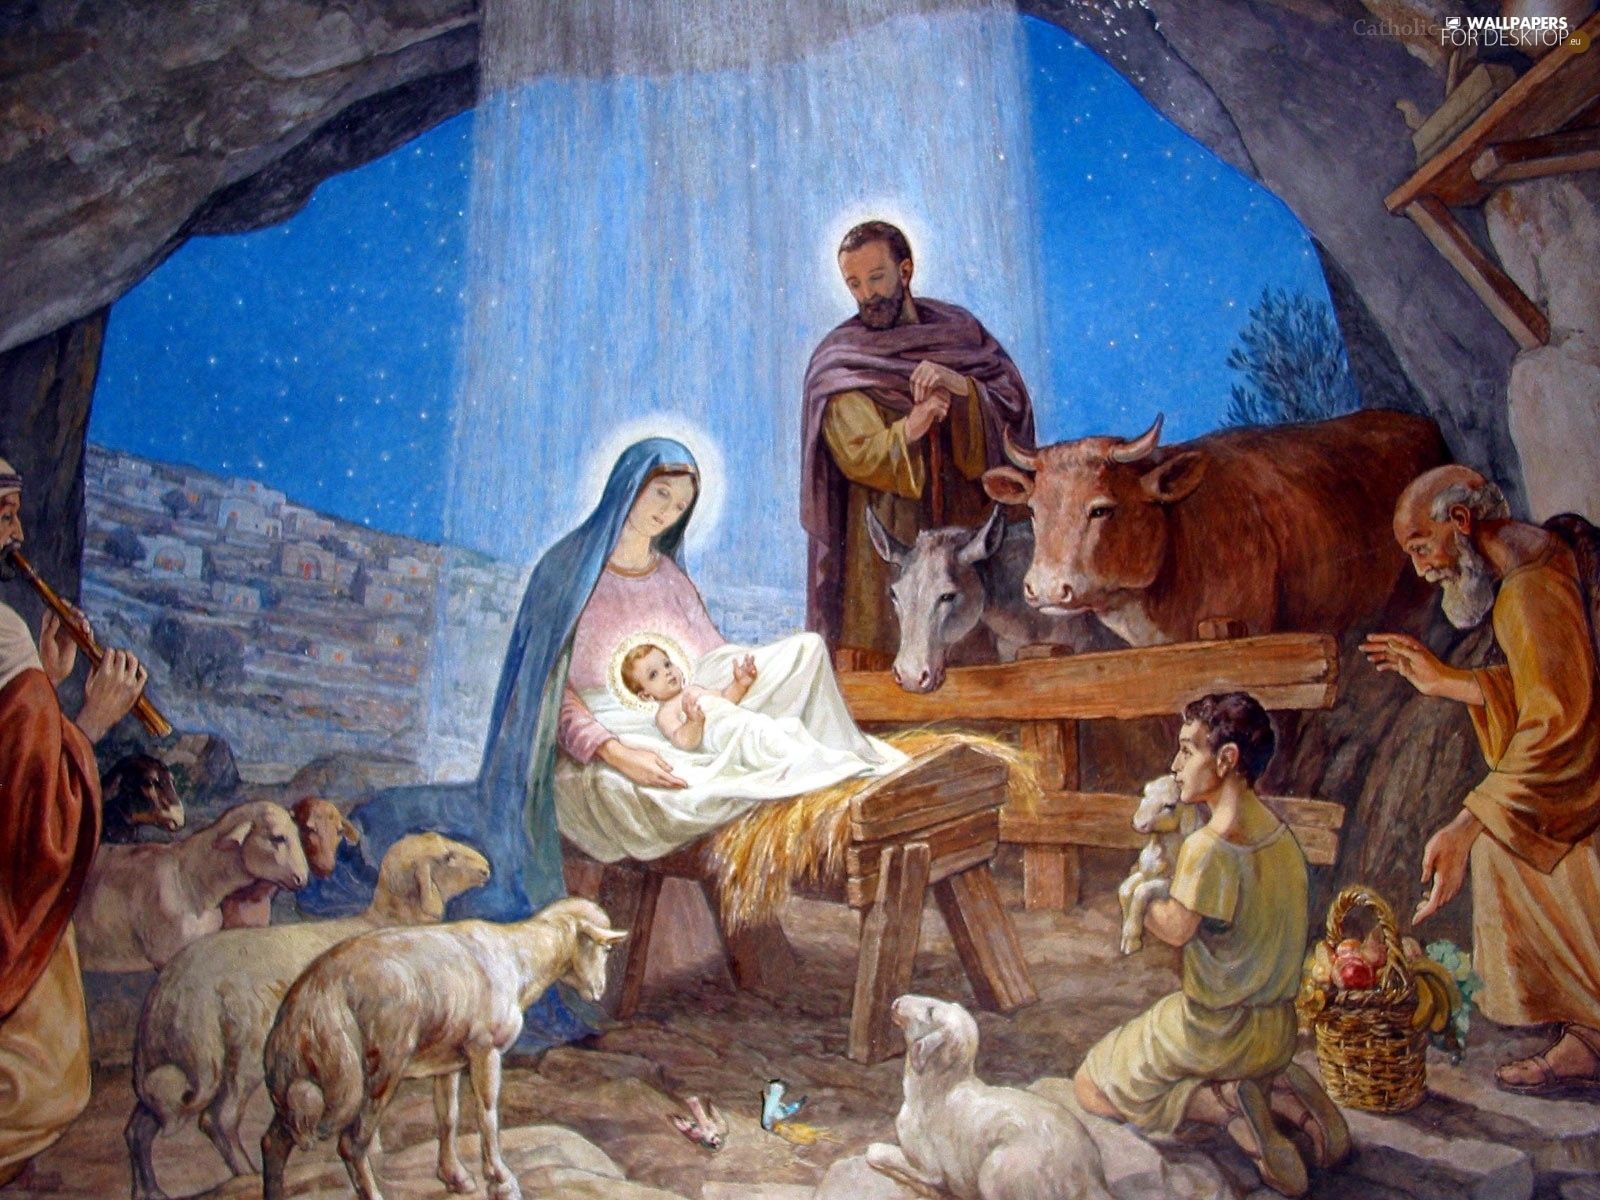 Mary and Joseph Wallpaper. Blessed Virgin Mary Wallpaper, Virgin Mary Wallpaper and Mary Day of the Dead Wallpaper